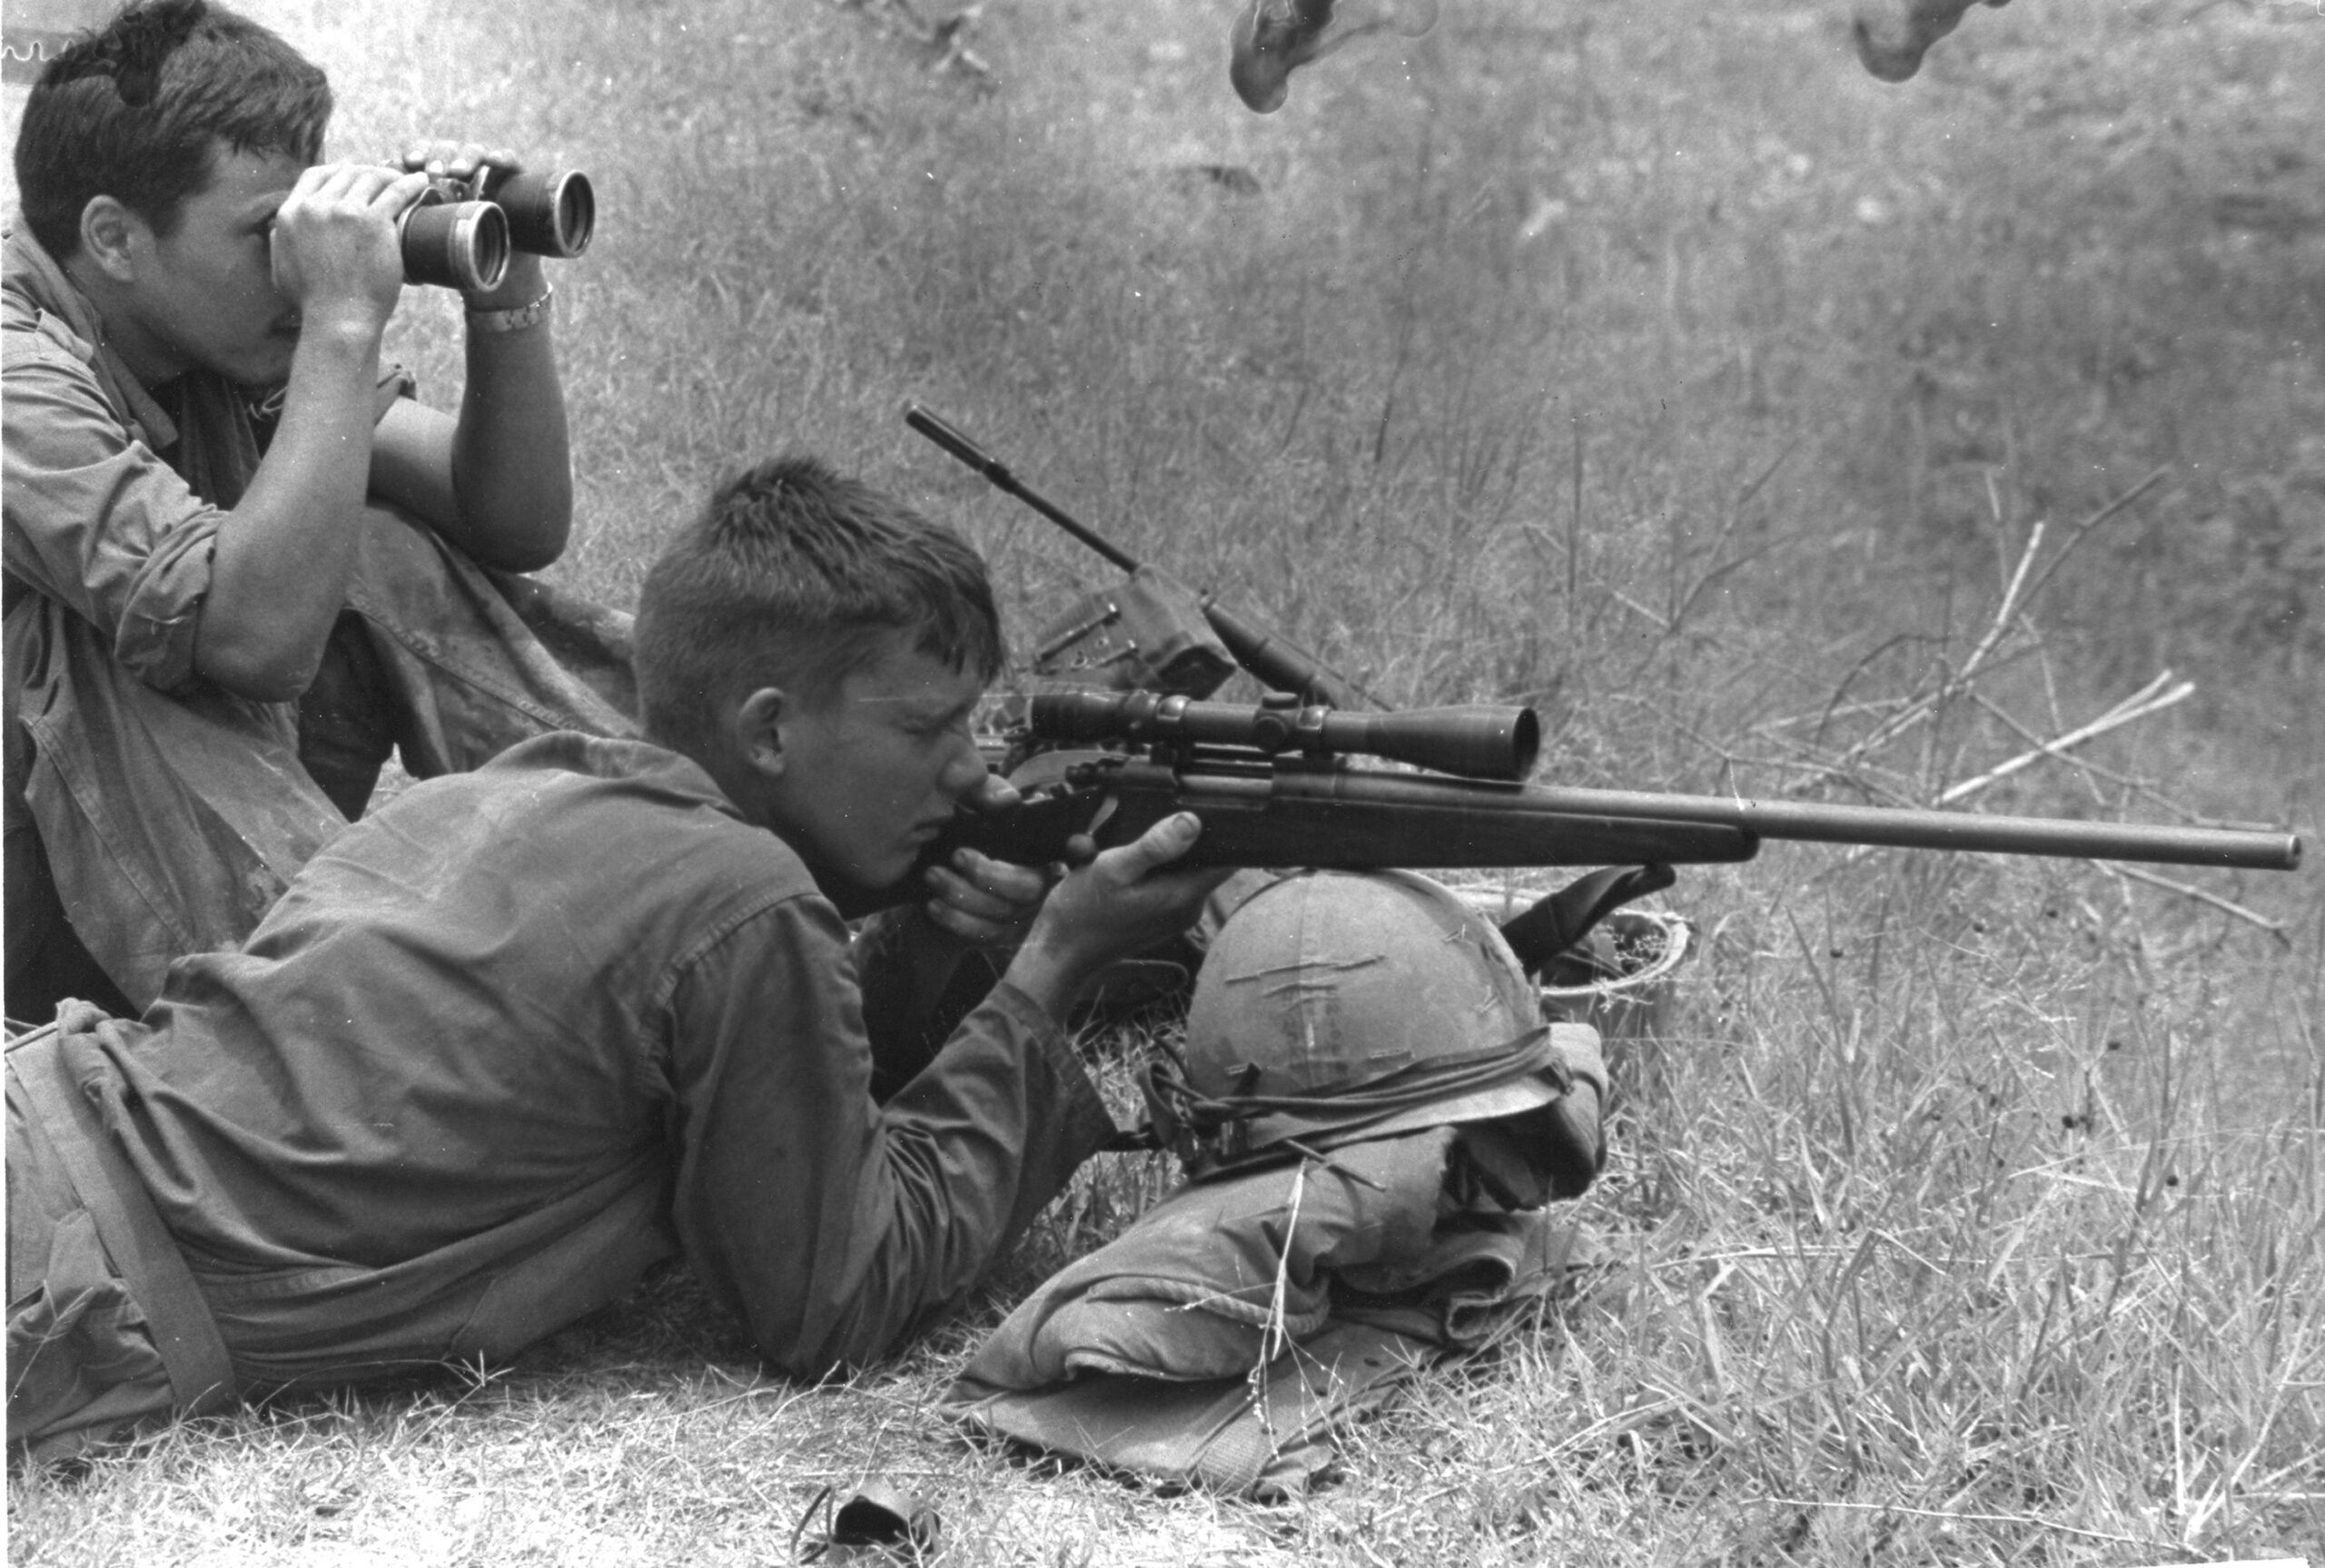 How the myth that Mr. Rogers was a deadly military sniper began